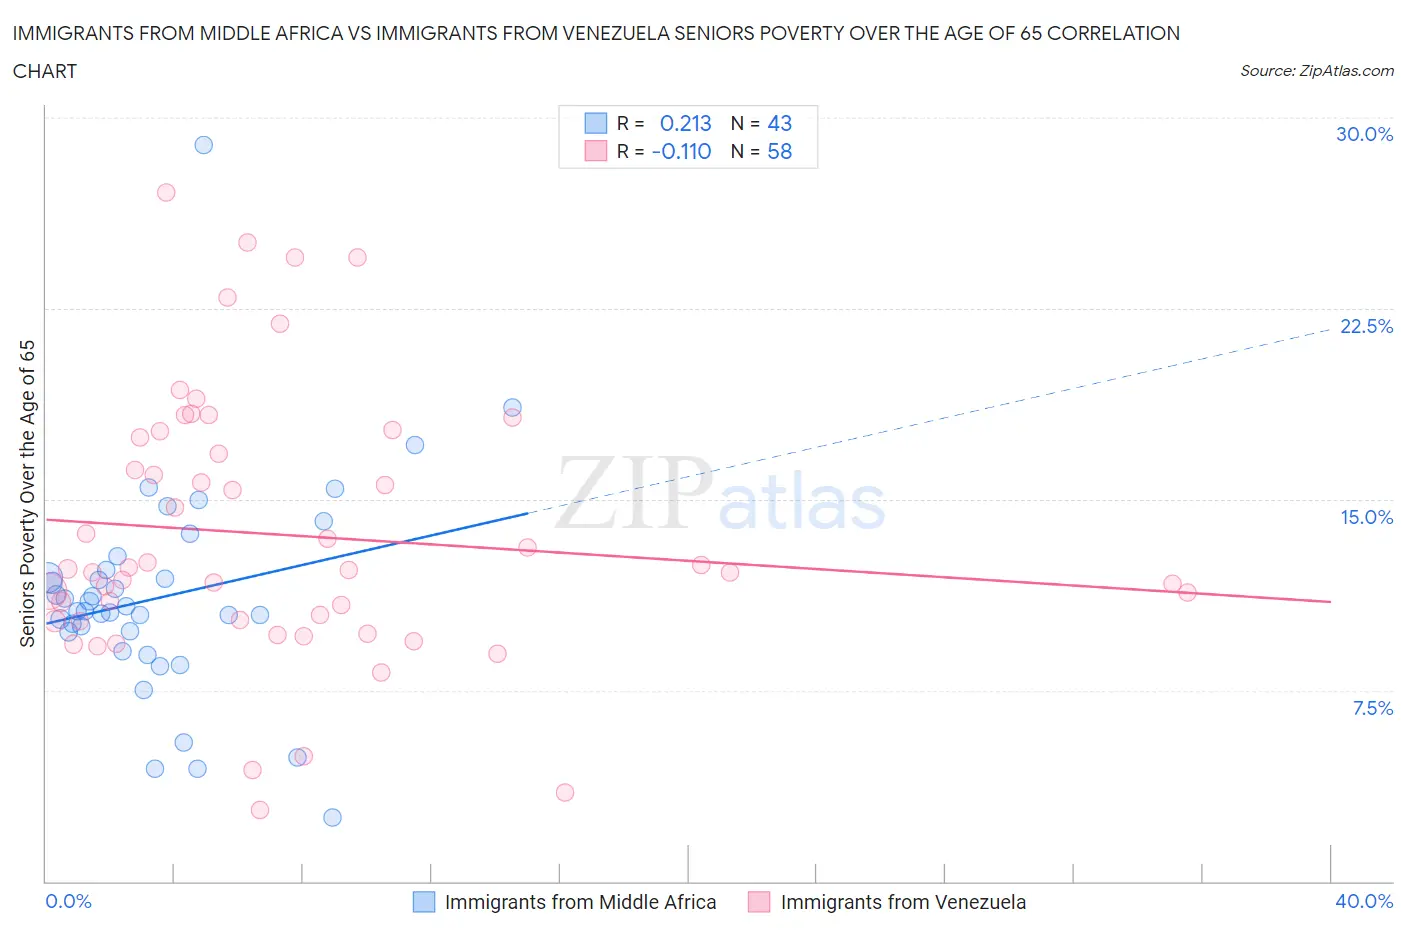 Immigrants from Middle Africa vs Immigrants from Venezuela Seniors Poverty Over the Age of 65